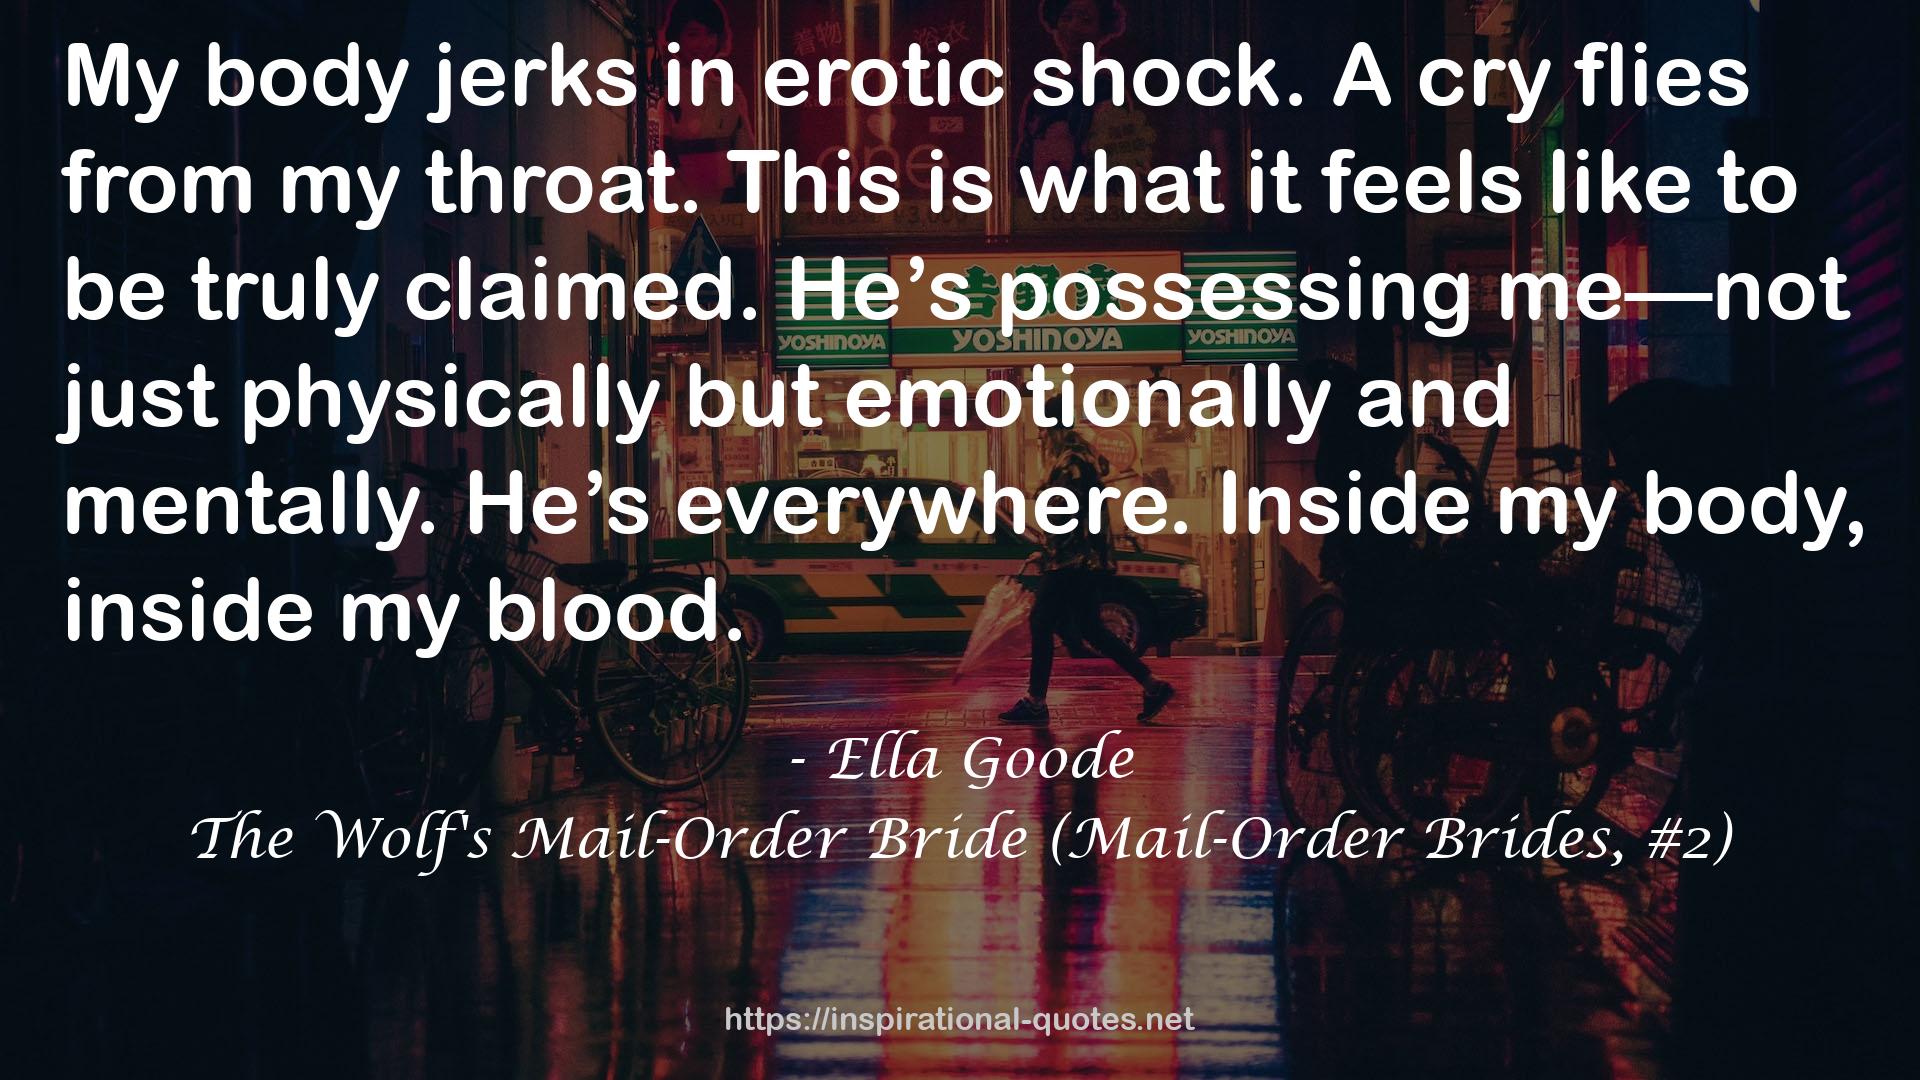 The Wolf's Mail-Order Bride (Mail-Order Brides, #2) QUOTES